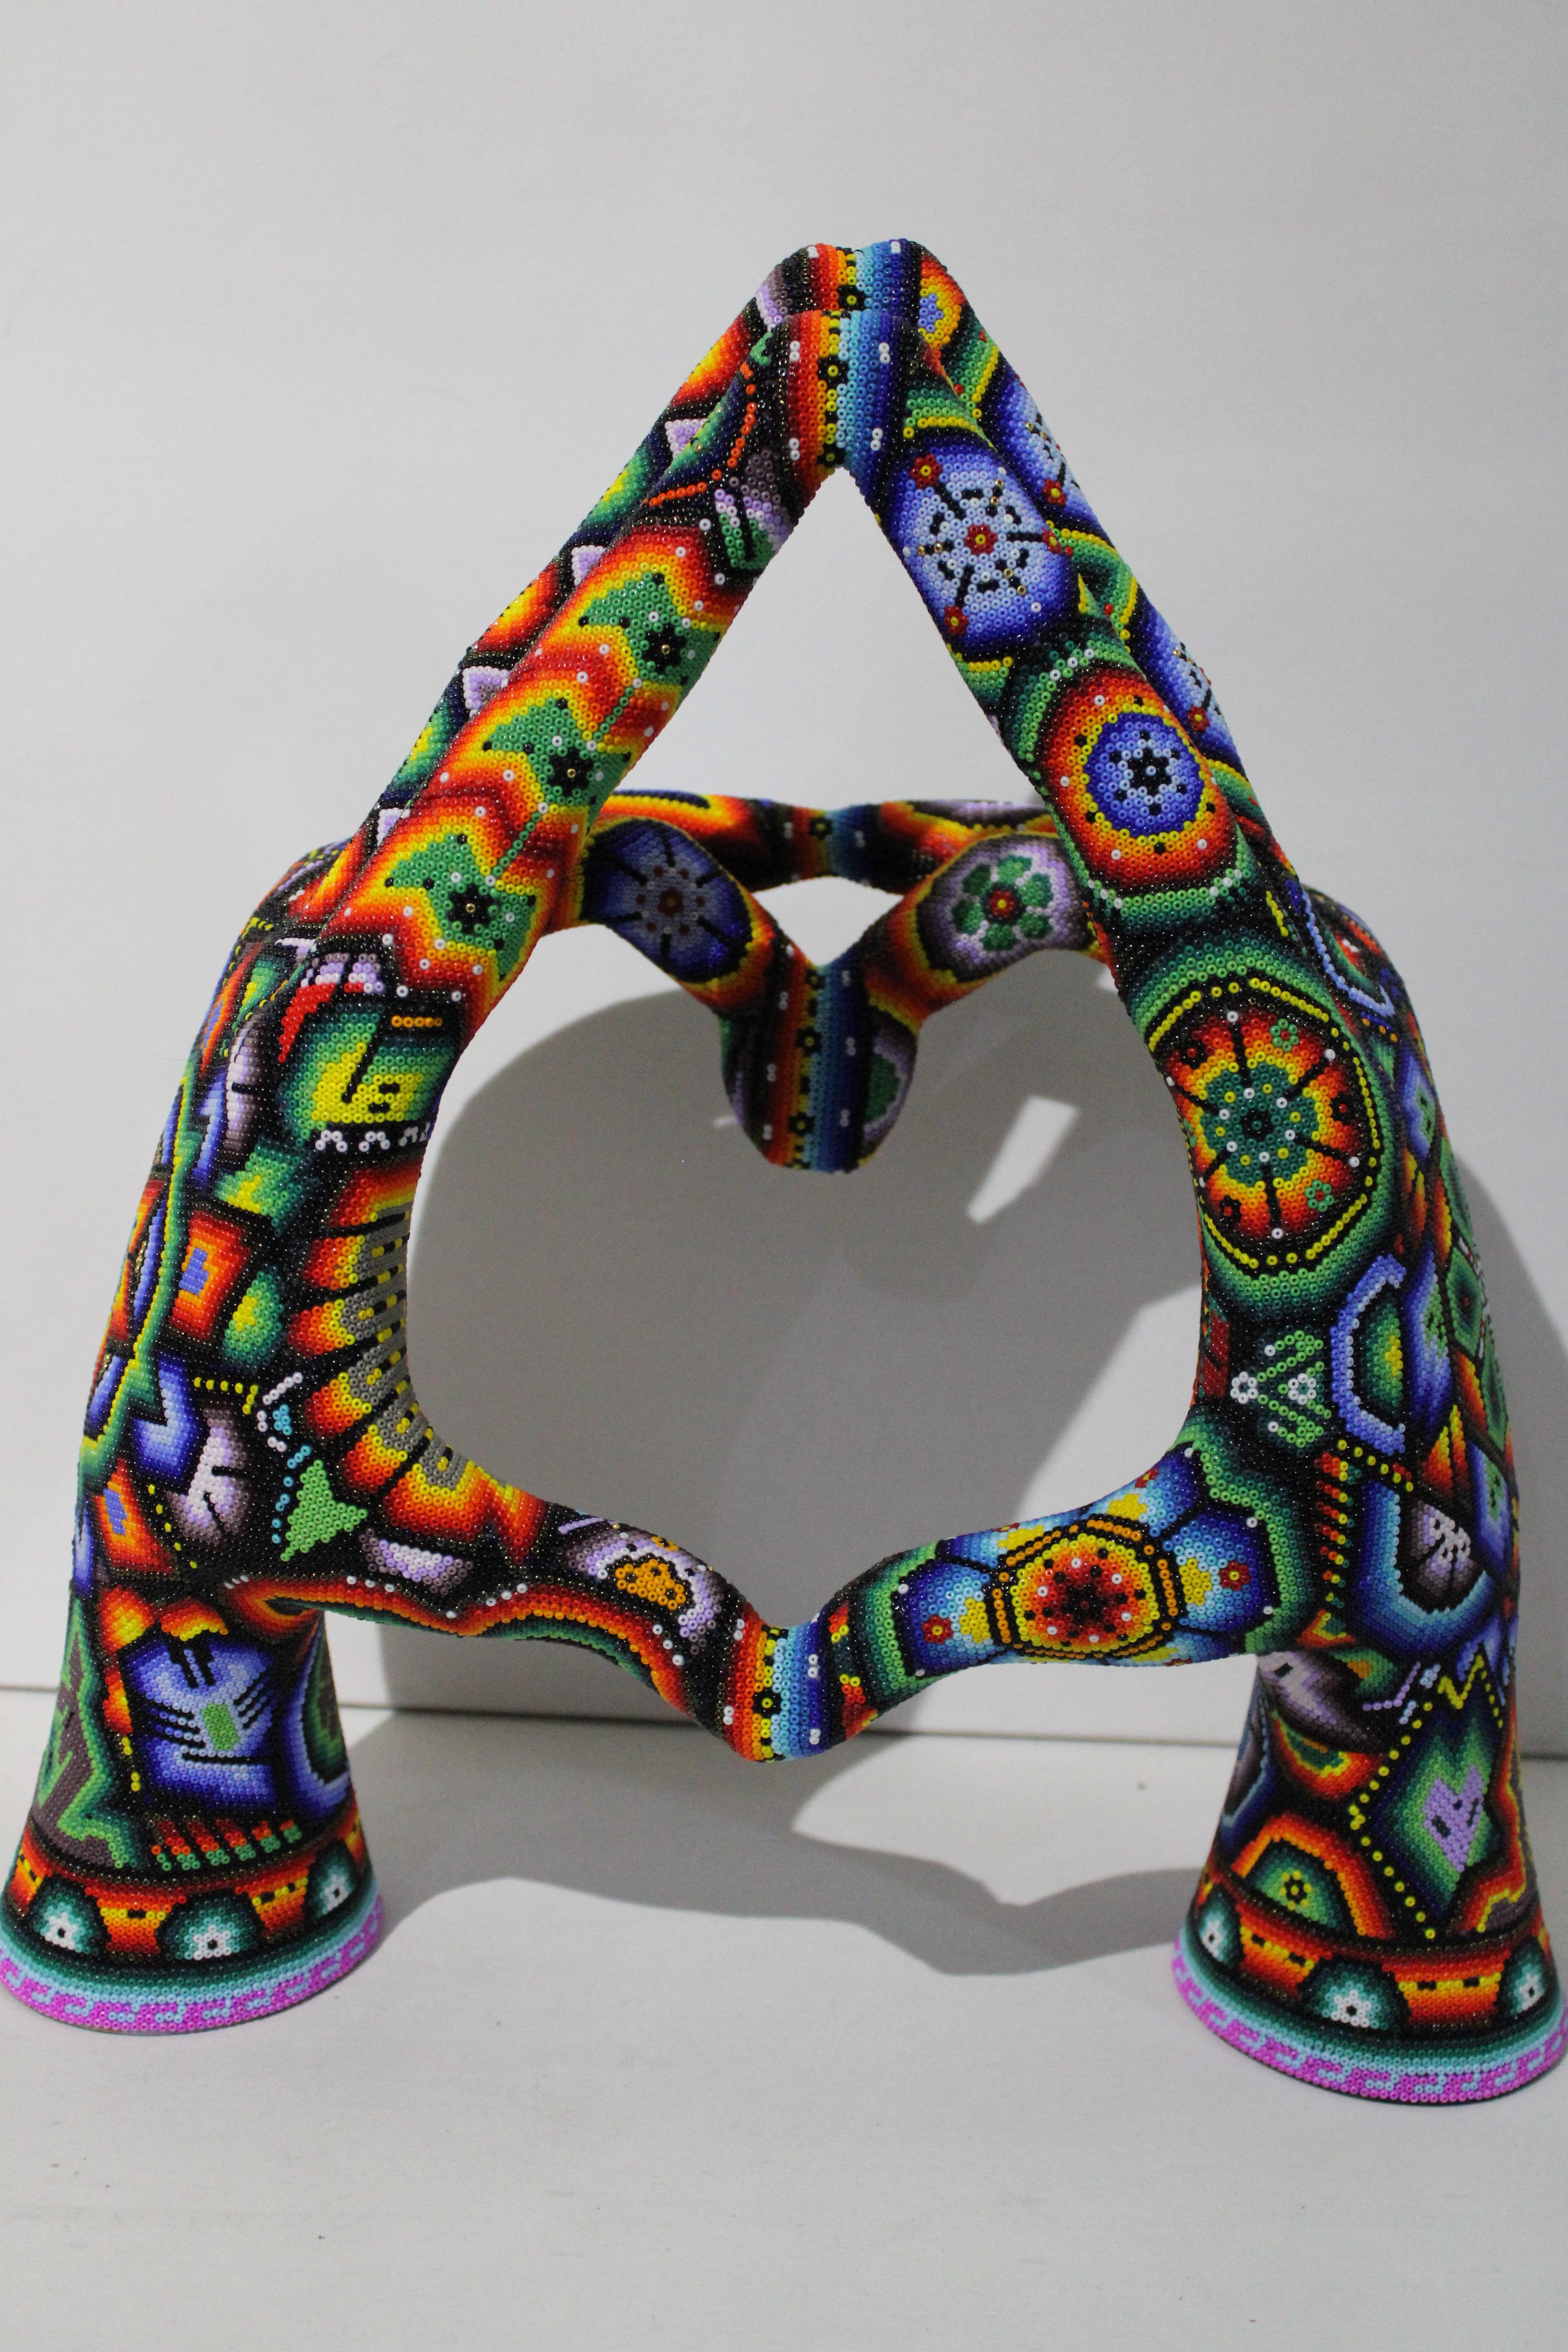 CHROMA aka Rick Wolfryd  Figurative Sculpture - "Love Temple"  from Magic Hands Huichol ALTERATIONS Series 